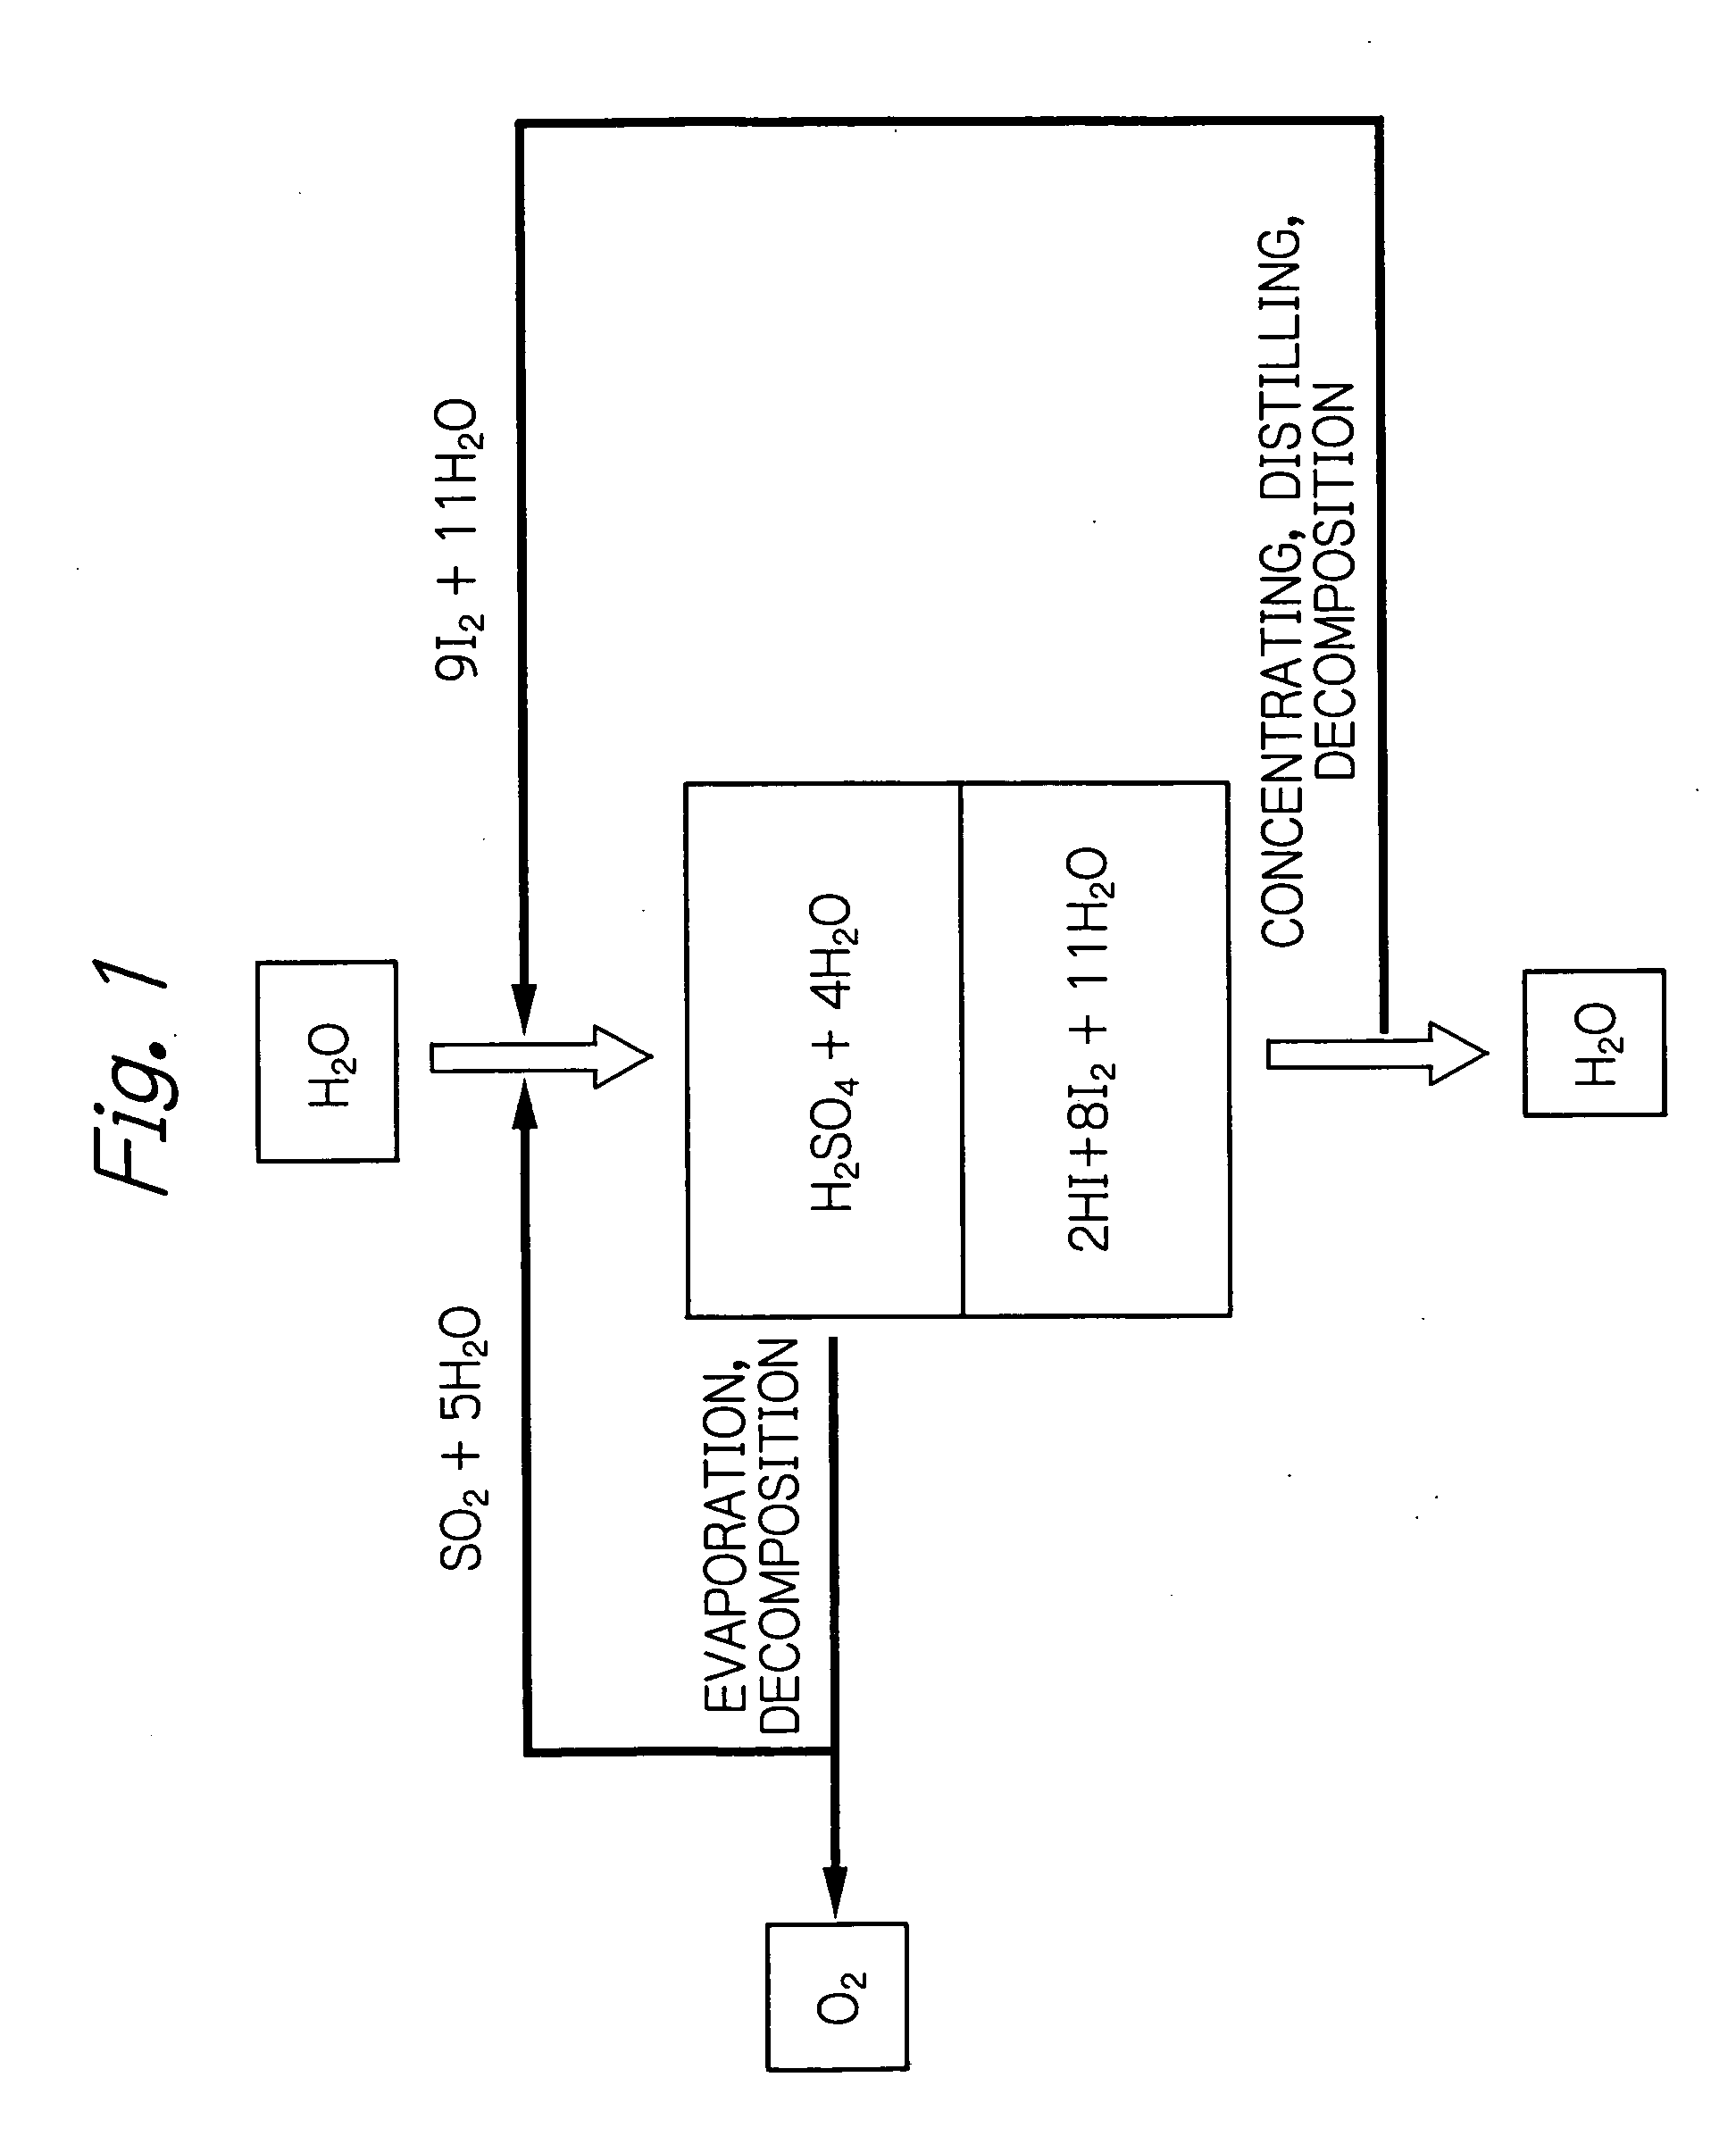 Process for efficient hydrogen production by thermochemical water splitting using iodine and sulfur dioxide